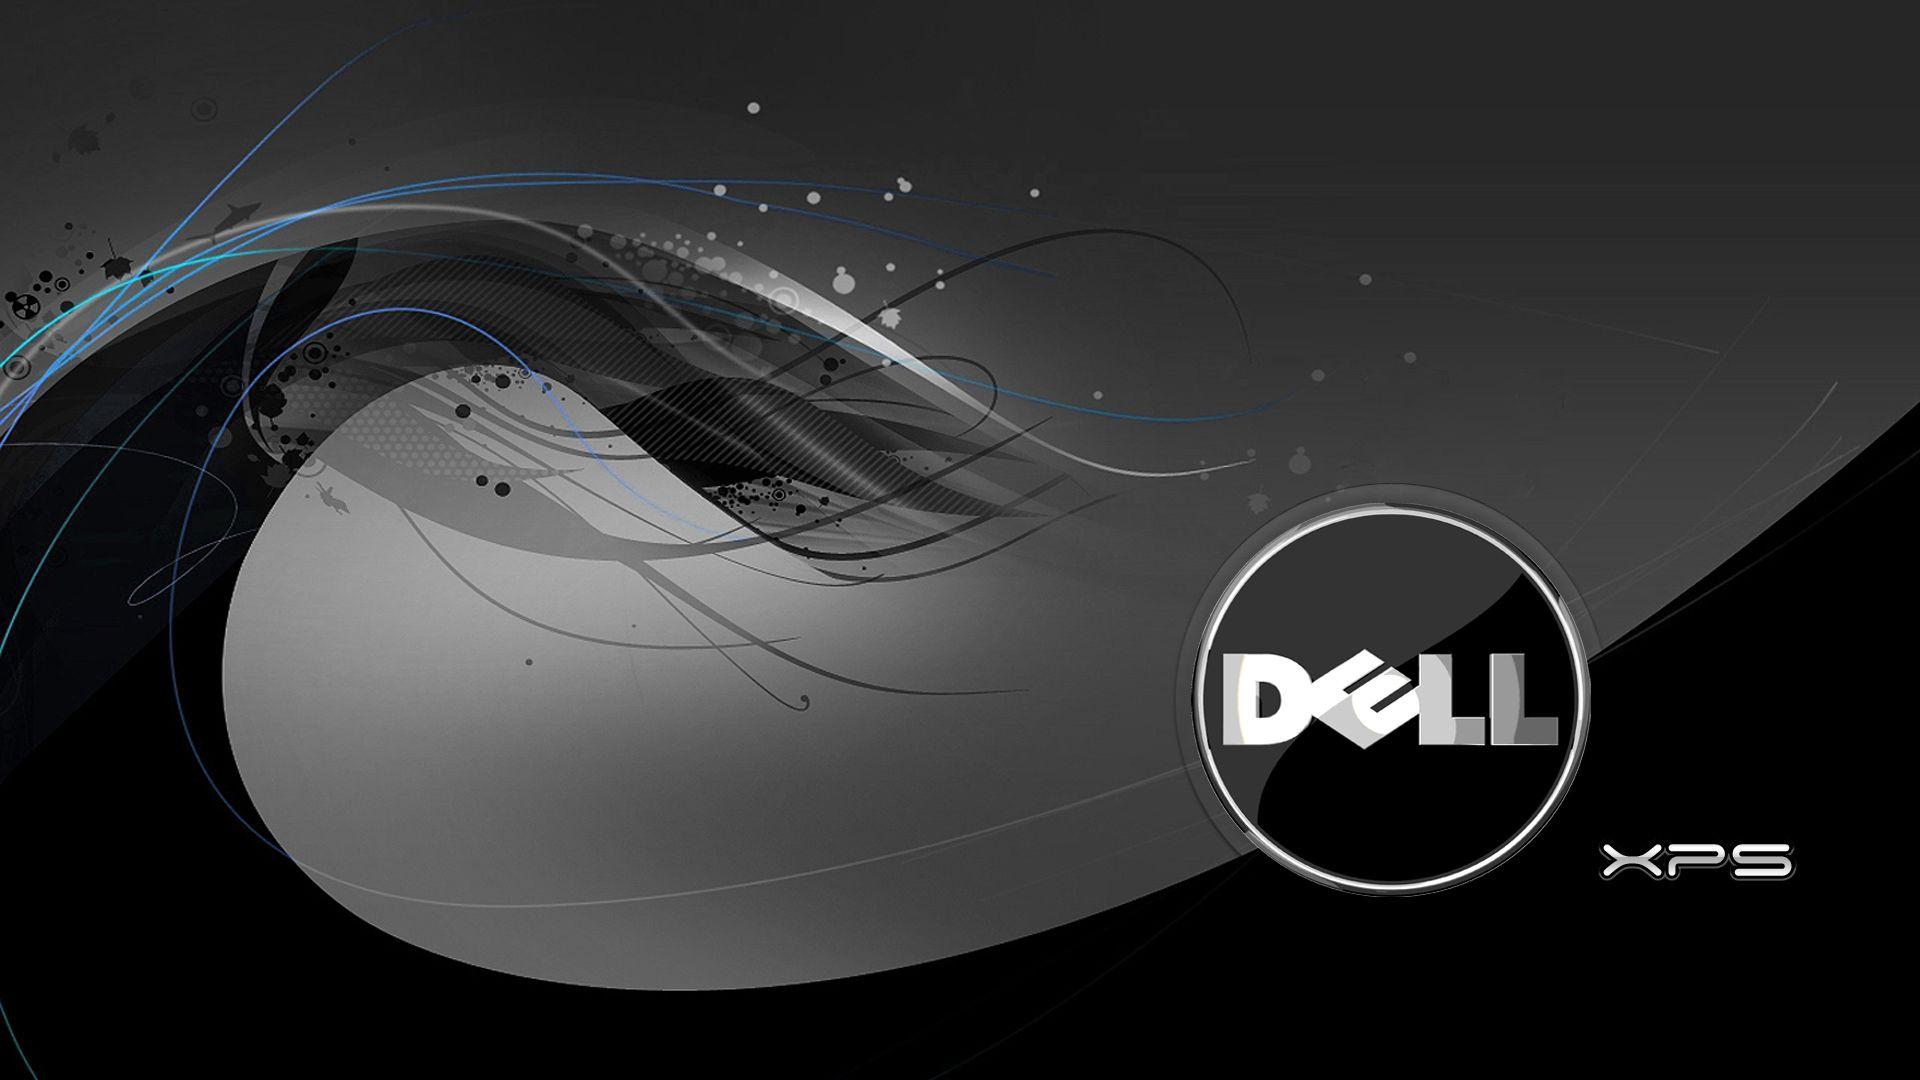 Dell PC Wallpapers - Top Free Dell PC